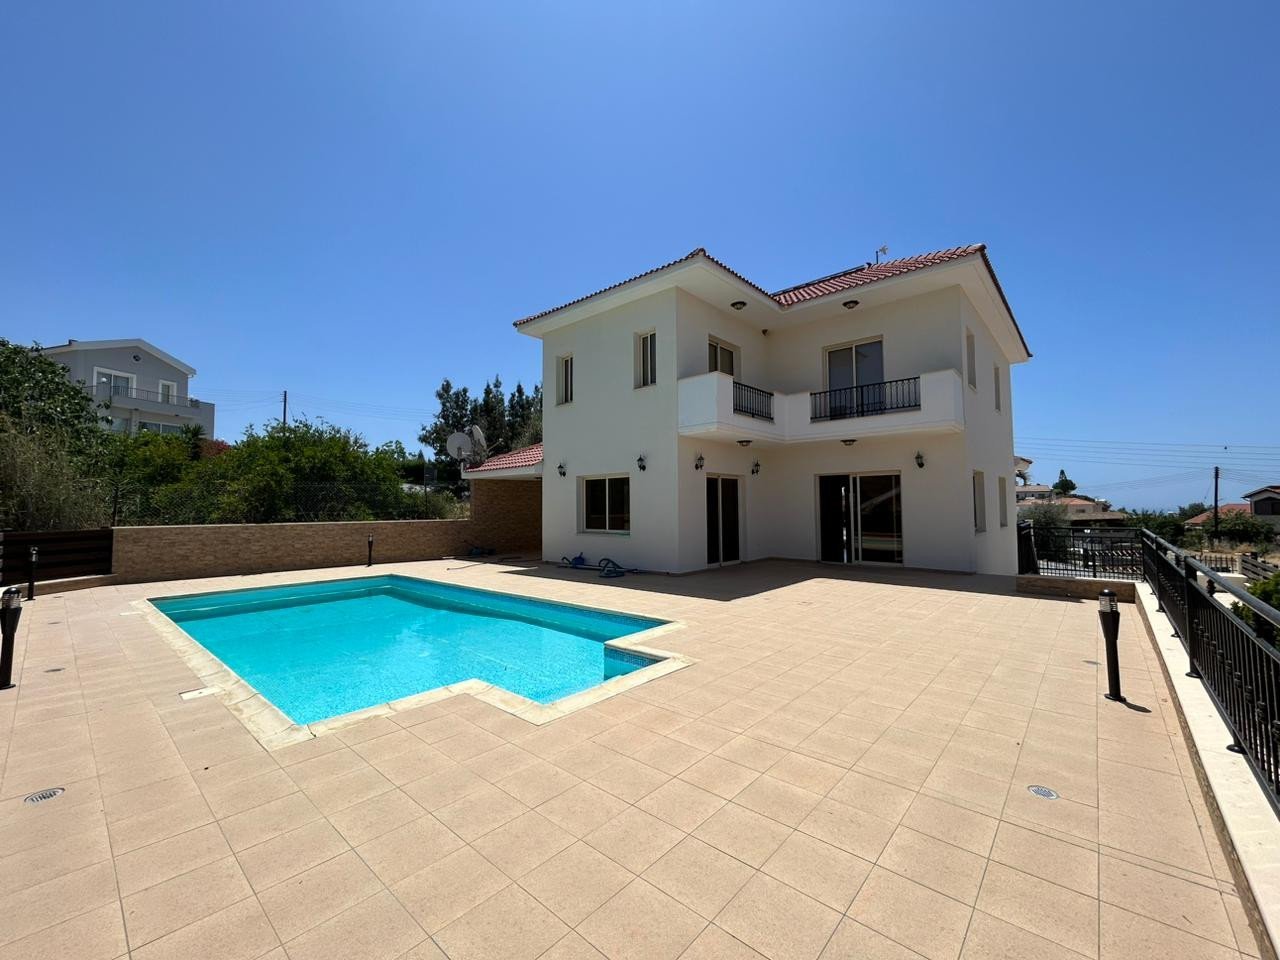 Property for Rent: House (Detached) in Parekklisia, Limassol for Rent | Key Realtor Cyprus